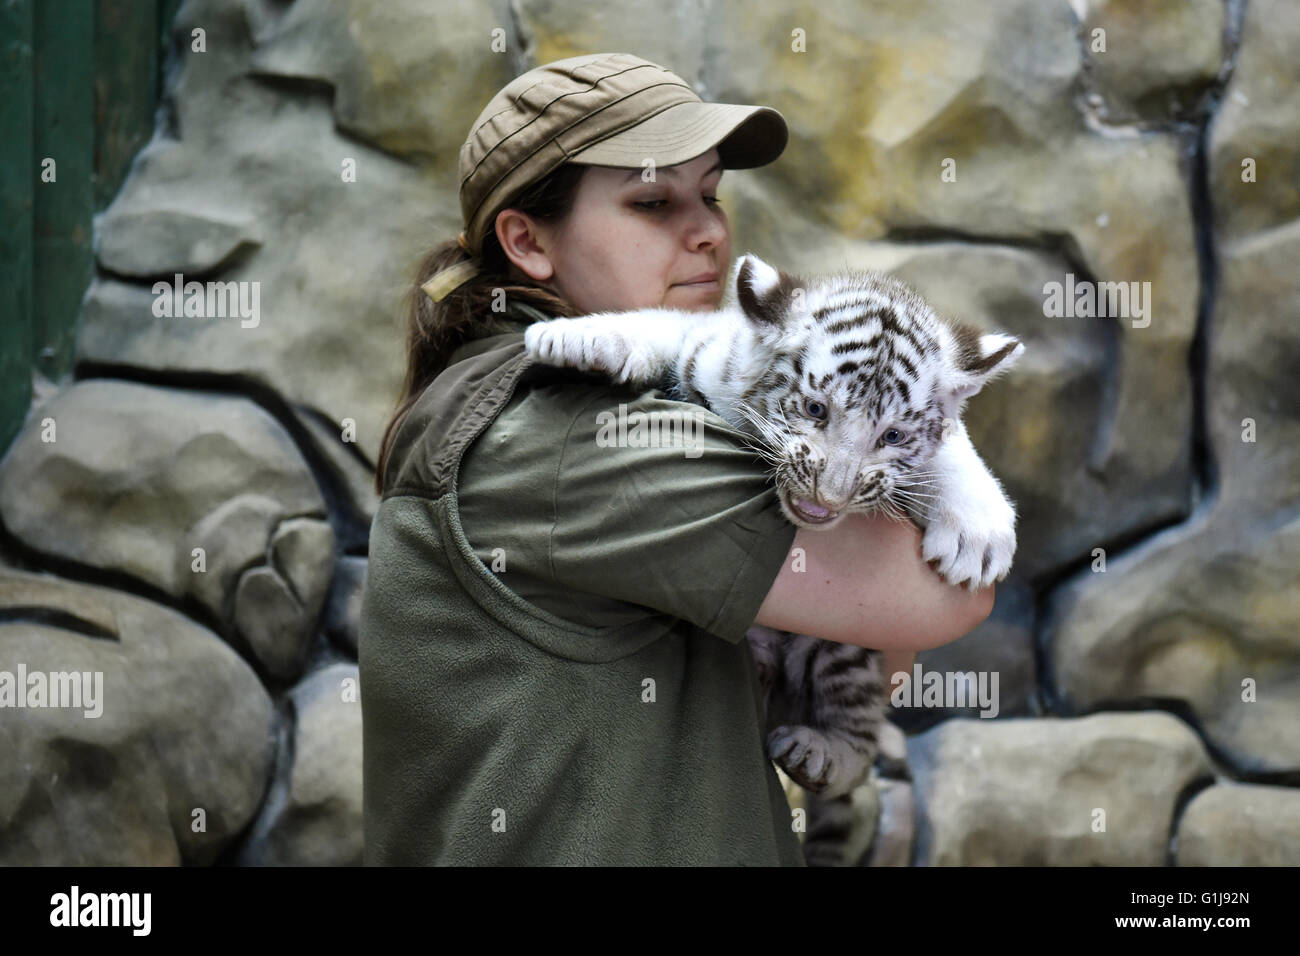 Liberec, Czech Republic. 16th May, 2016. Two cubs of a very rare white Indian tiger, born on February 25, 2016 in Liberec Zoo, Czech Republic, were vaccinated, weighed and obtained chips during a veterinary examination on May 16, 2016. © Radek Petrasek/CTK Photo/Alamy Live News Stock Photo